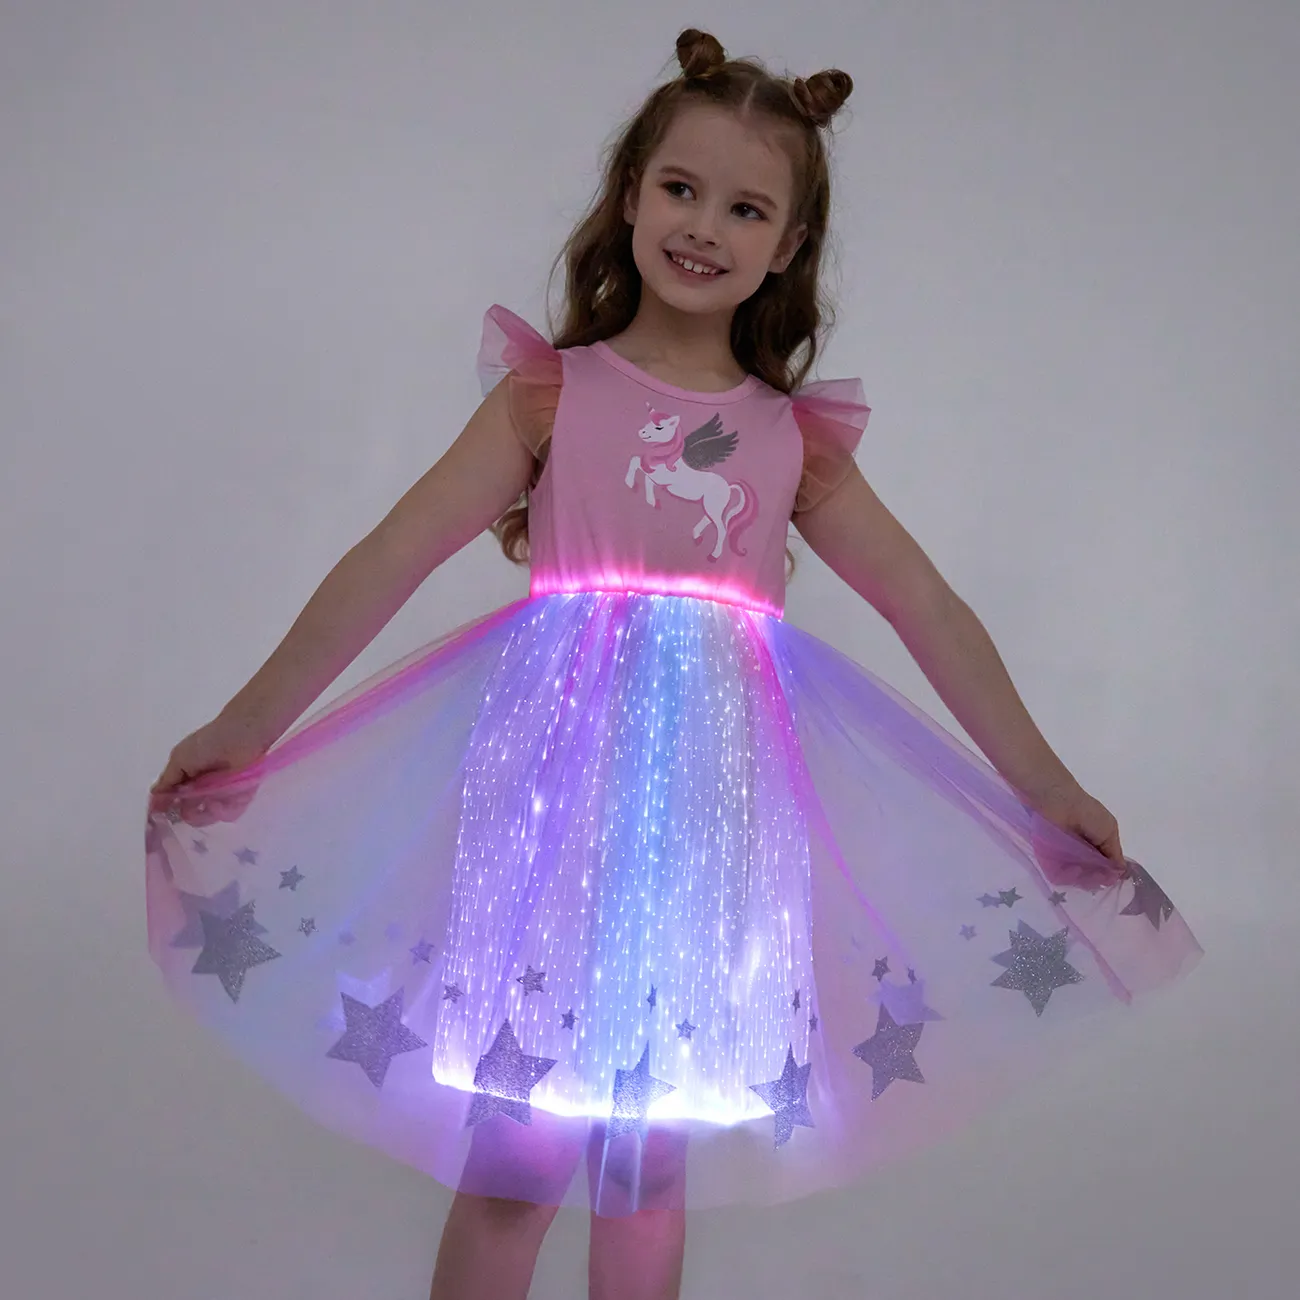 Go-Glow Illuminating Unicorn Dress With Light Up Skirt Including Controller (Built-In Battery) Multi-color big image 1